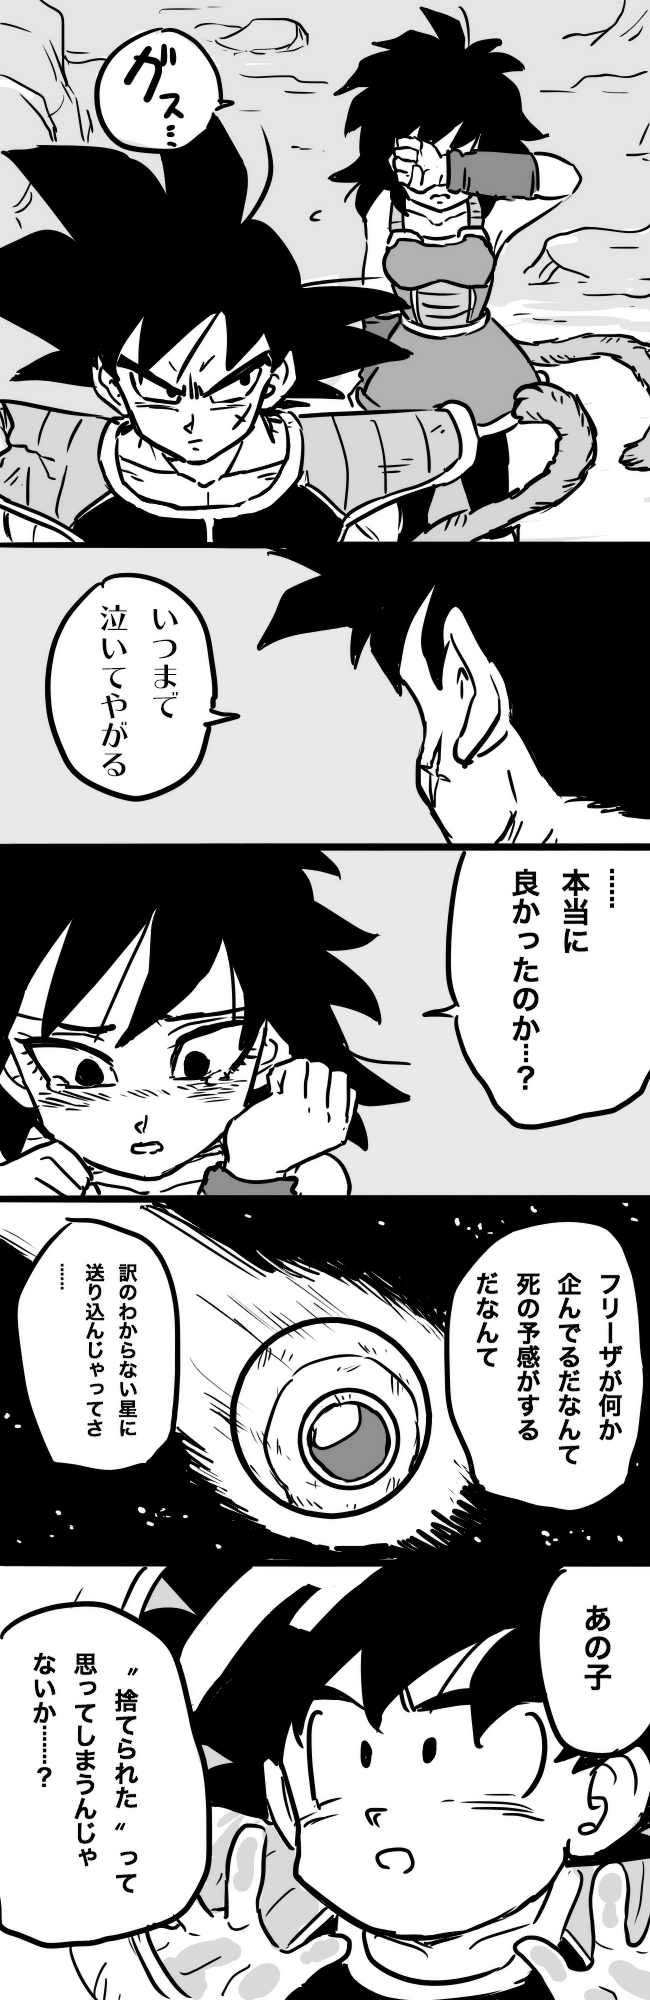 1girl 2boys armor bardock black black_hair couple crying dragon_ball eyes father_and_son gine greyscale highres looking_away looking_back monochrome mother_and_son multiple_boys panels scar son_gokuu space_craft speech_bubble tail tears tkgsize translation_request wristband